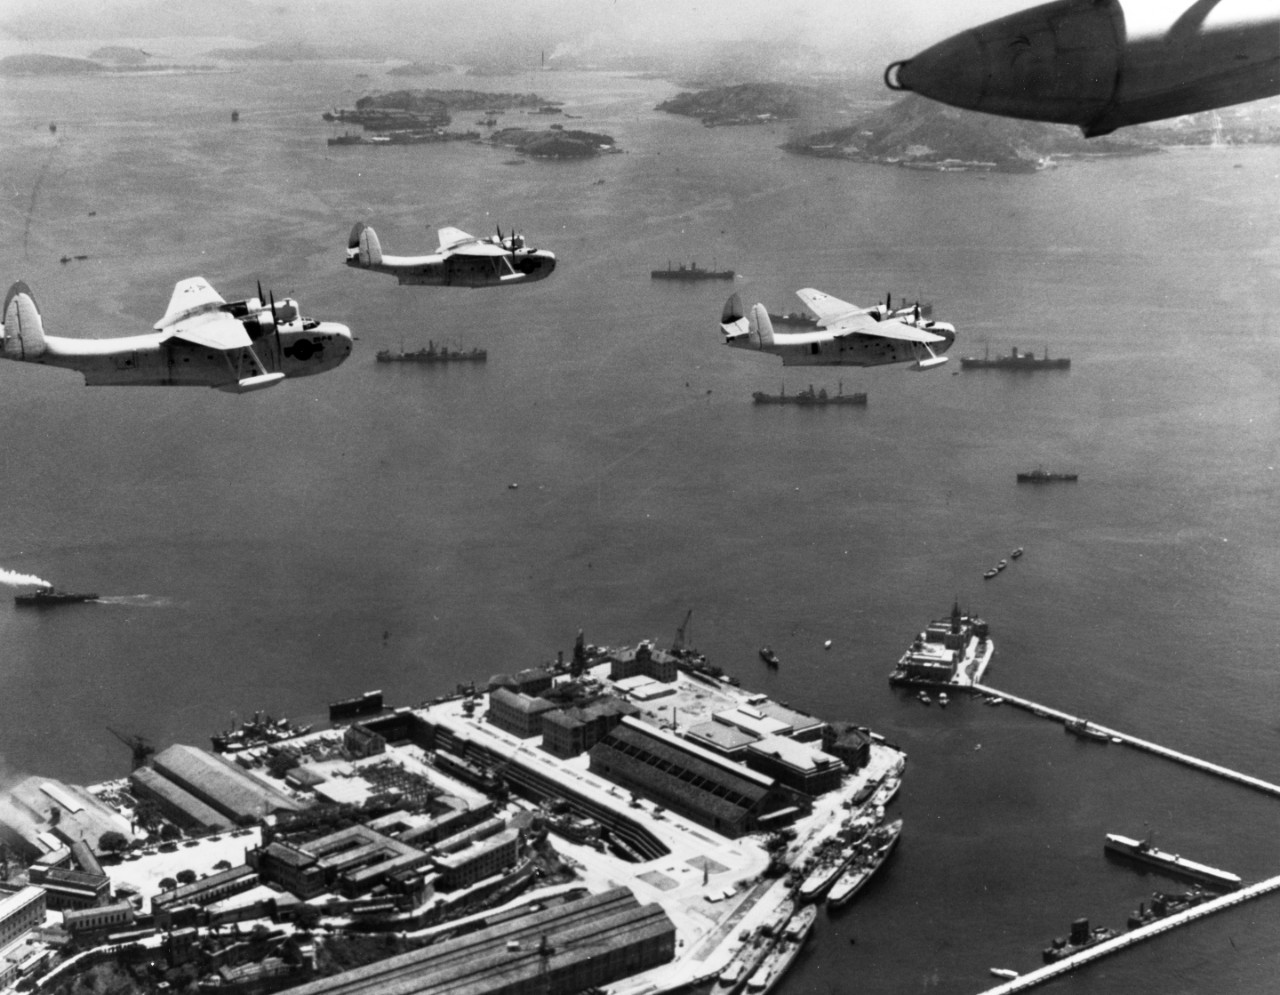 Martin PBM-3 Mariner Patrol Bombers of VP-211 fly in formation over the Brazilian naval dockyard at Rio de Janeiro, Brazil, December 1943. Several incomplete destroyers are among the ships at the yard. NARA photo number 80-G-56965.